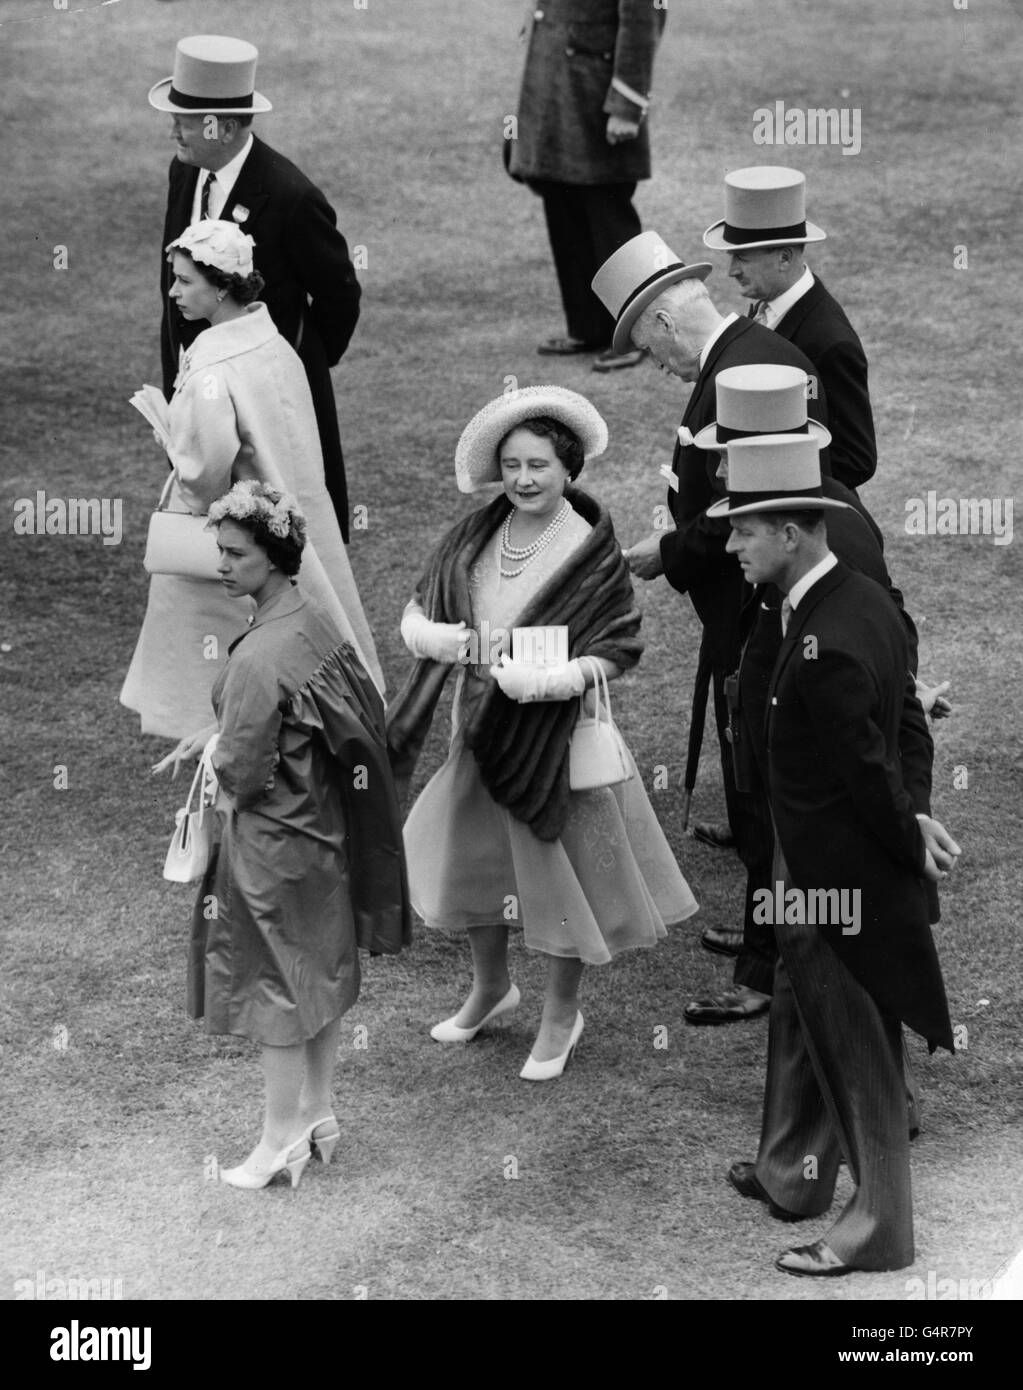 Queen Elizabeth II, the Duke of Edinburgh Princess Margaret and the Queen Mother at the Royal Ascot race meeting. Stock Photo